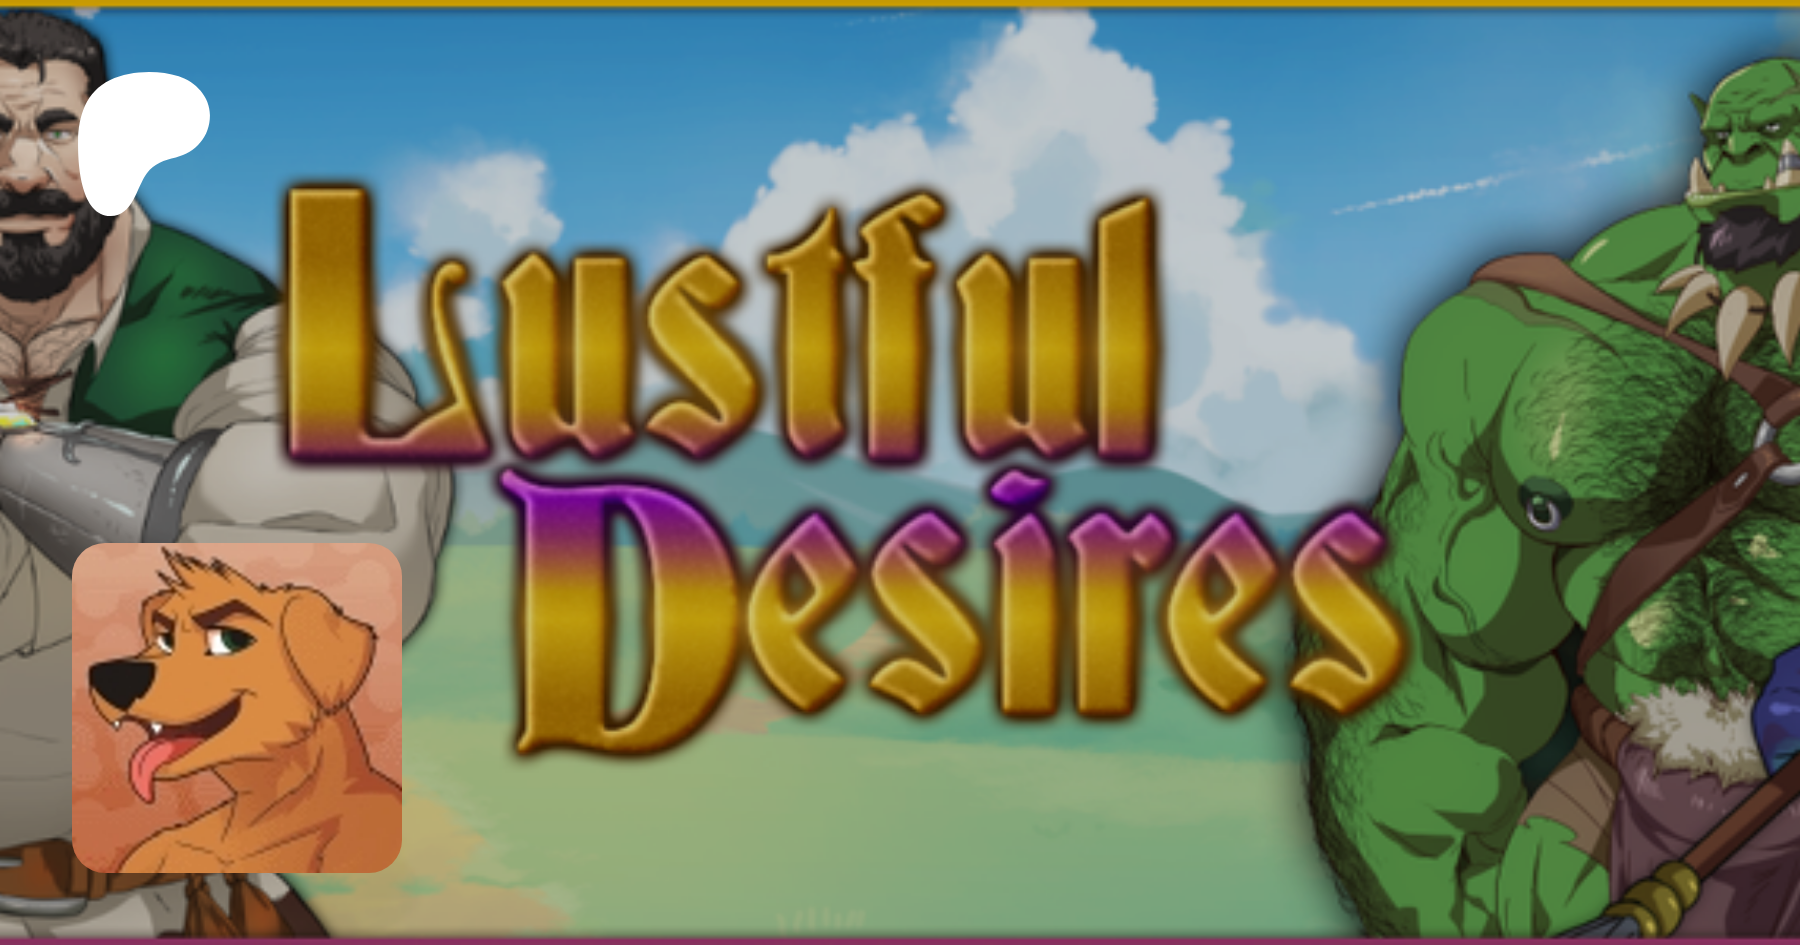 Lustful Desires by Hyao